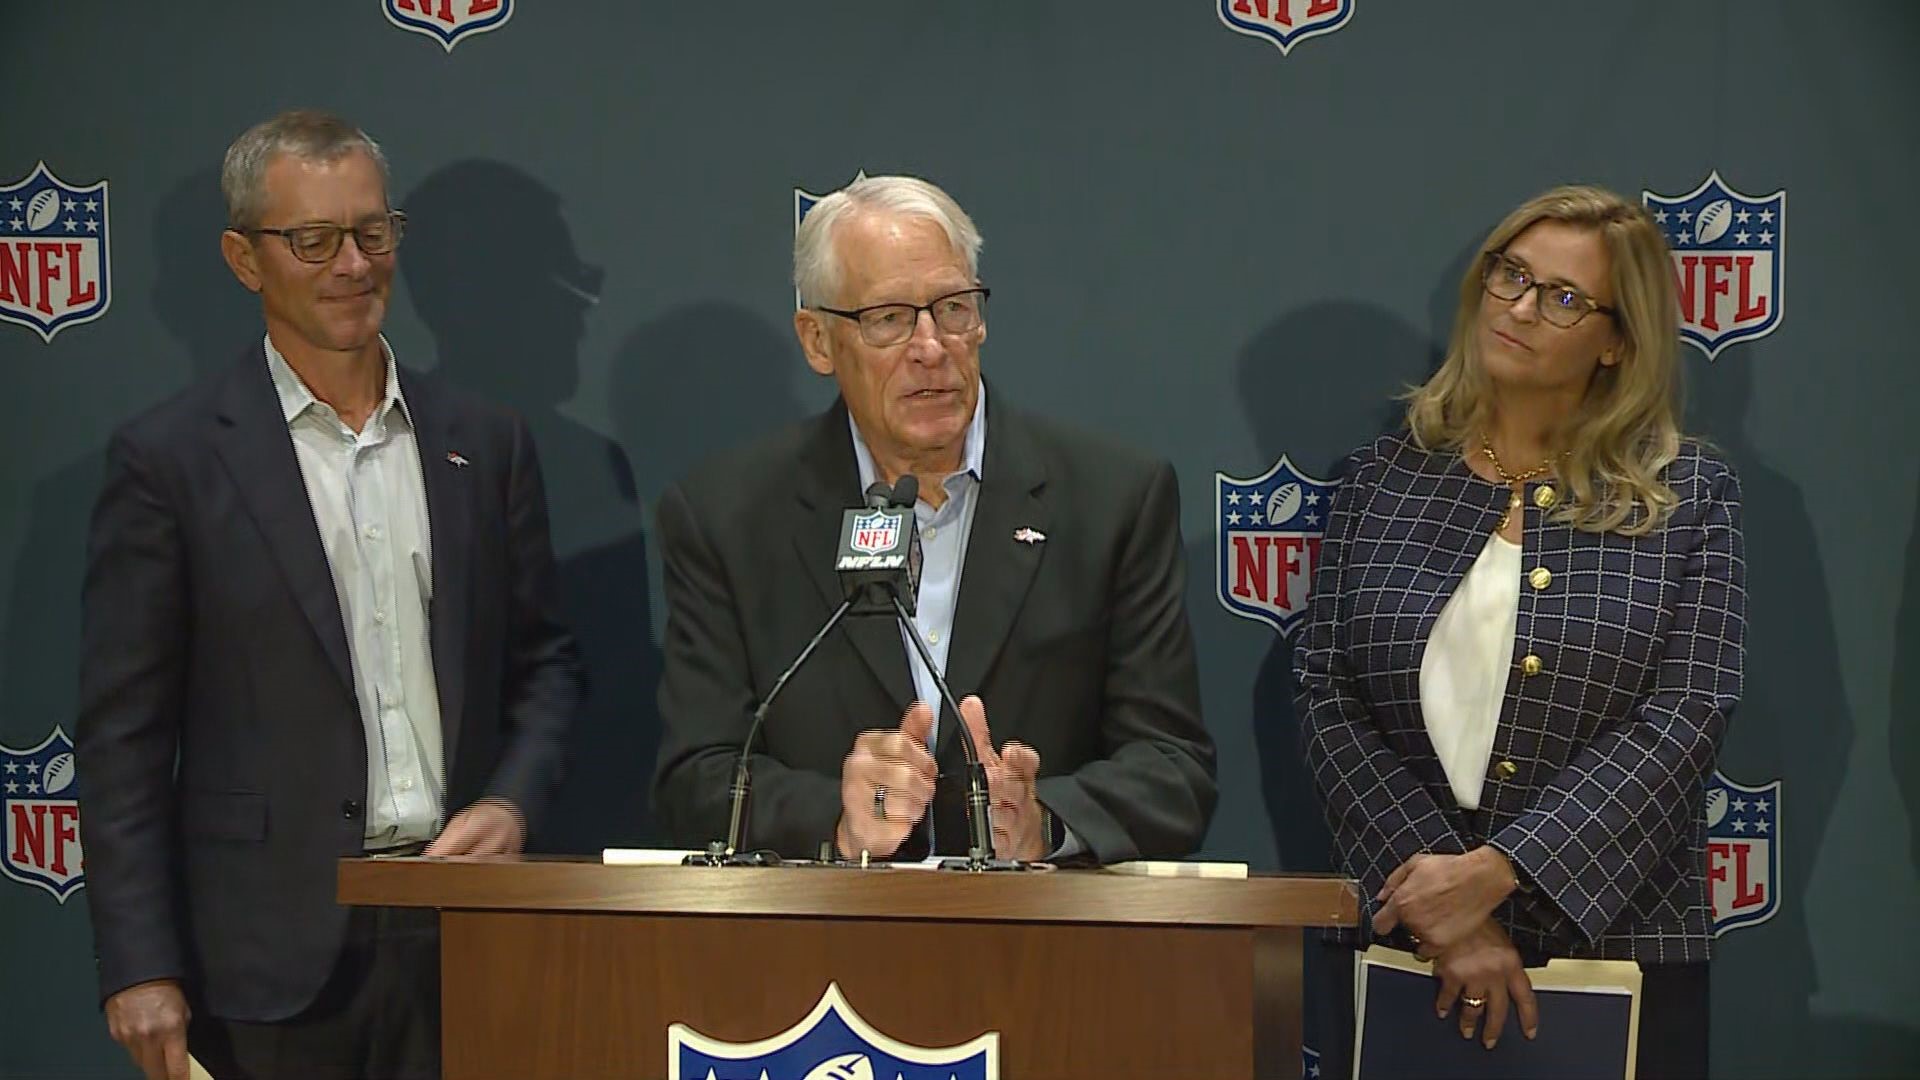 The Rob Walton-Greg Penner group has been unanimously approved to be the new owners of the Broncos.